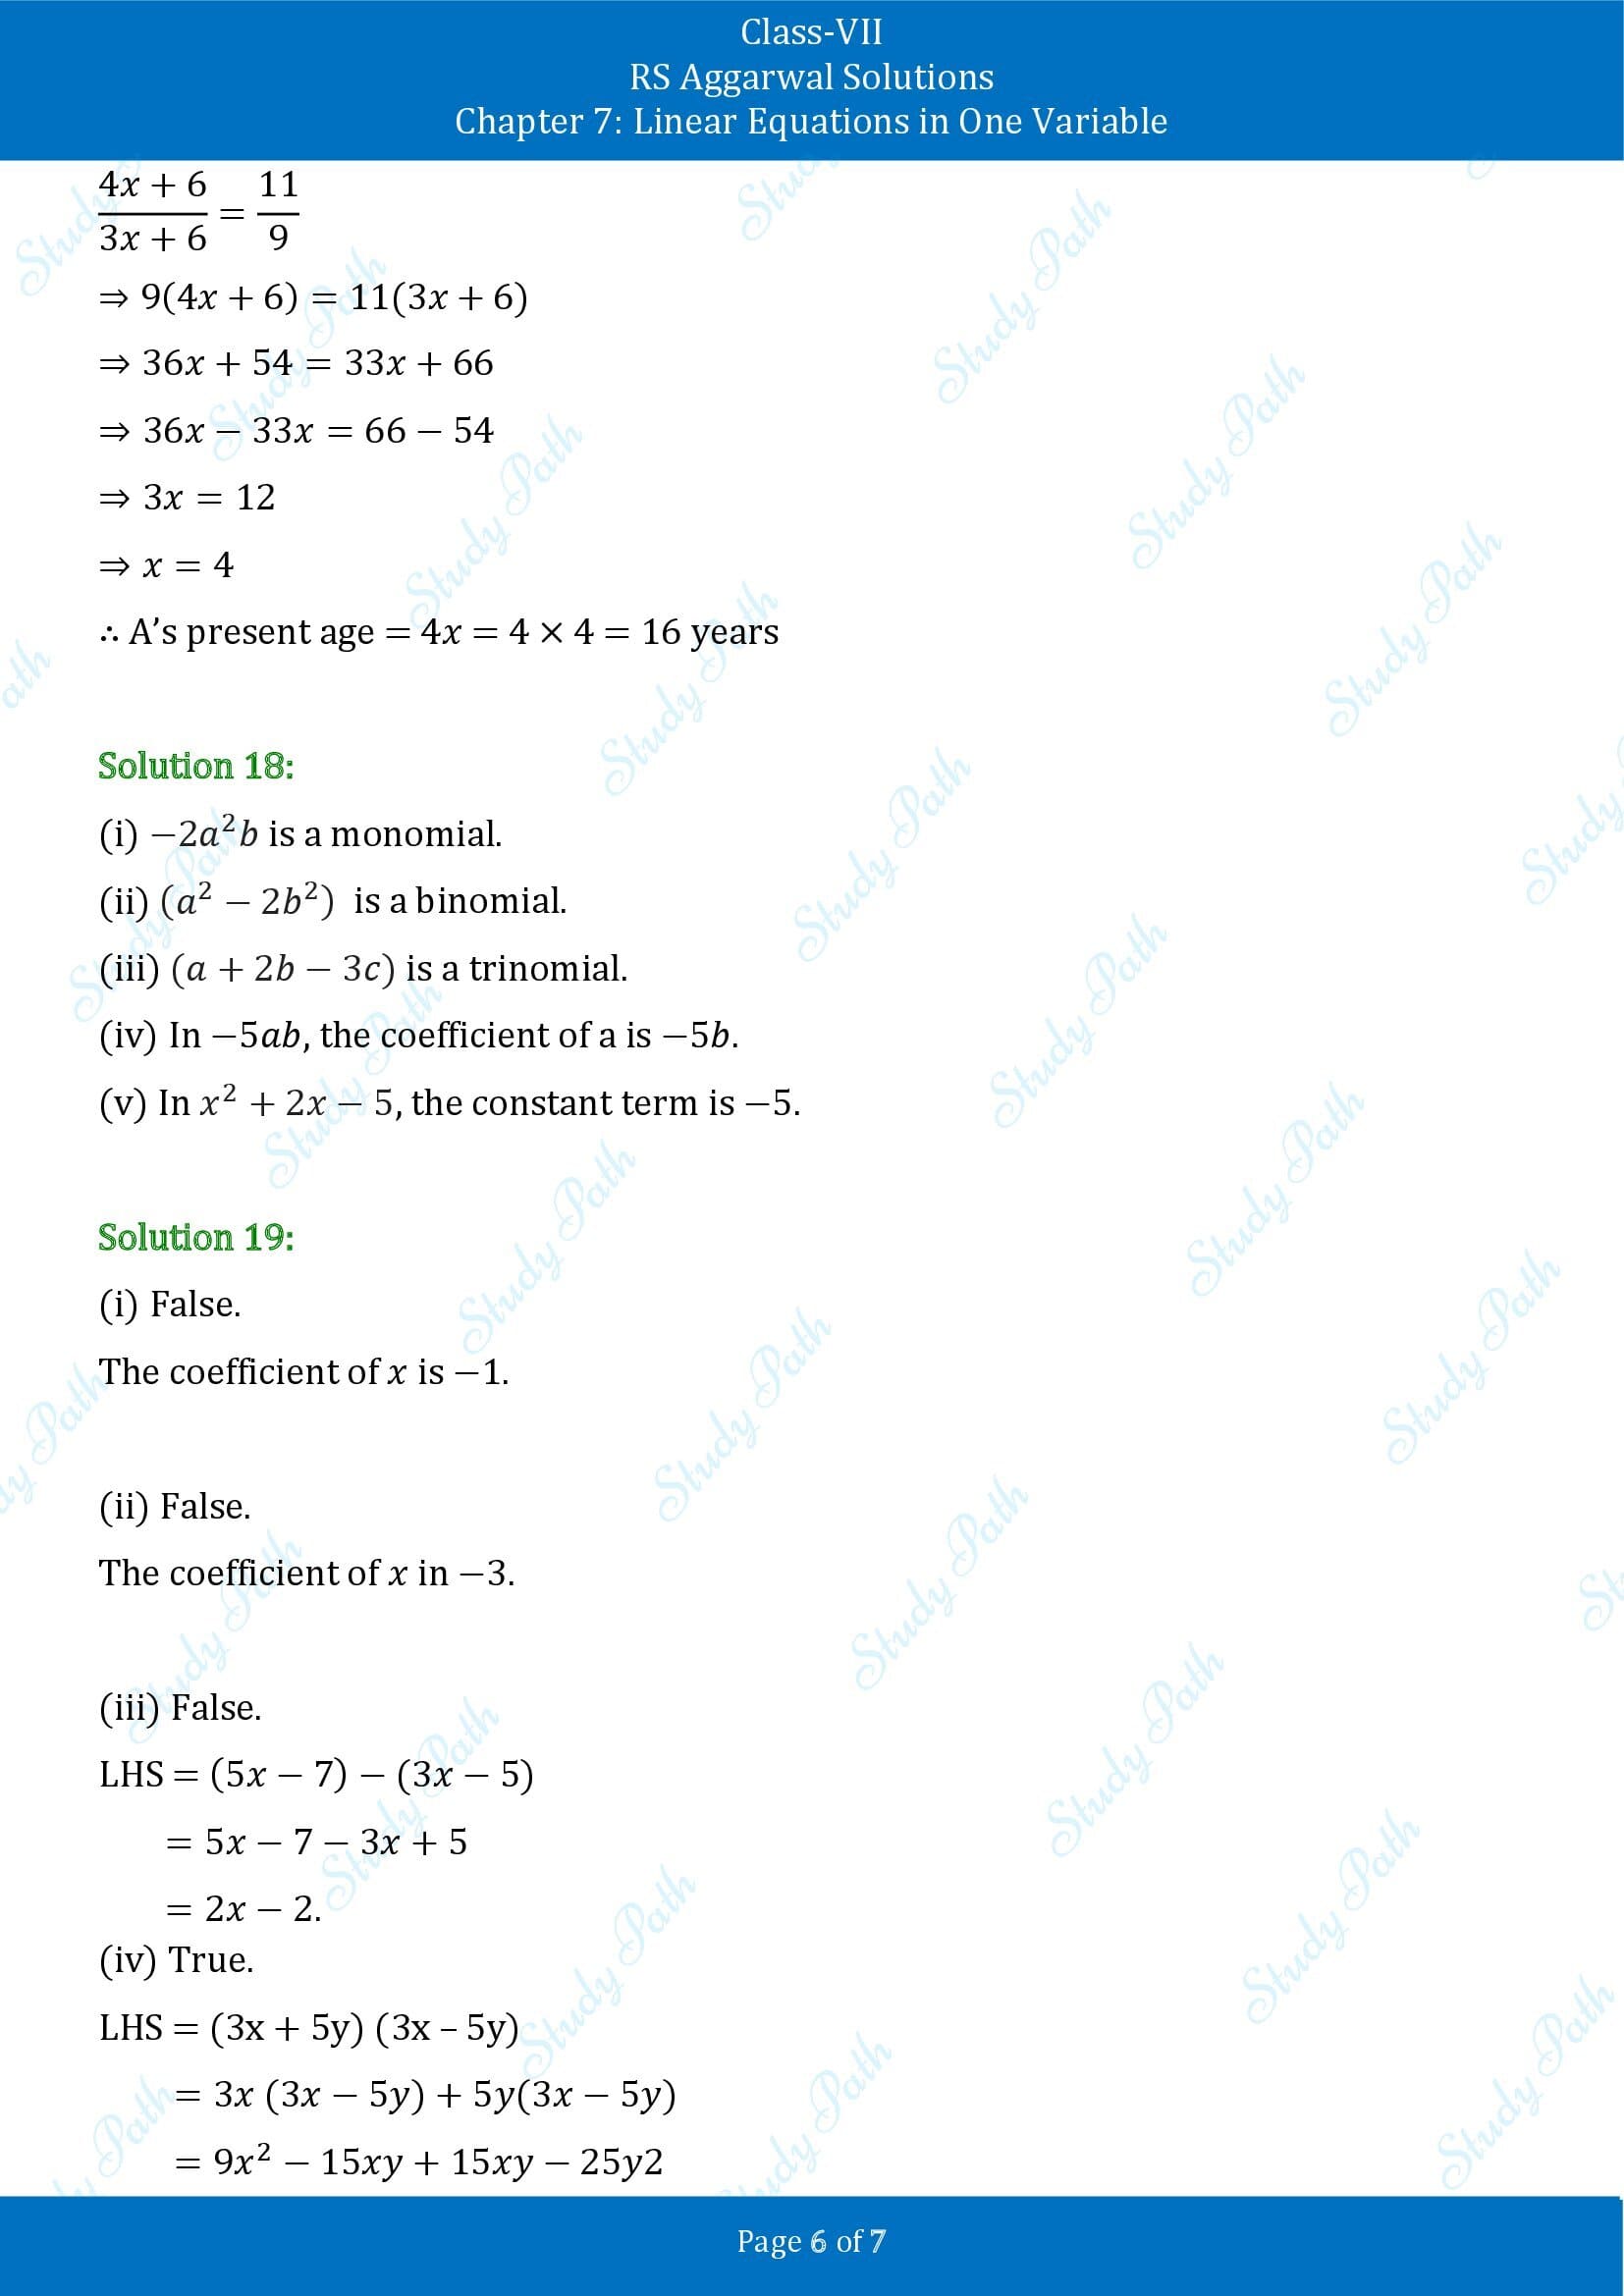 RS Aggarwal Solutions Class 7 Chapter 7 Linear Equations in One Variable Test Paper 00006